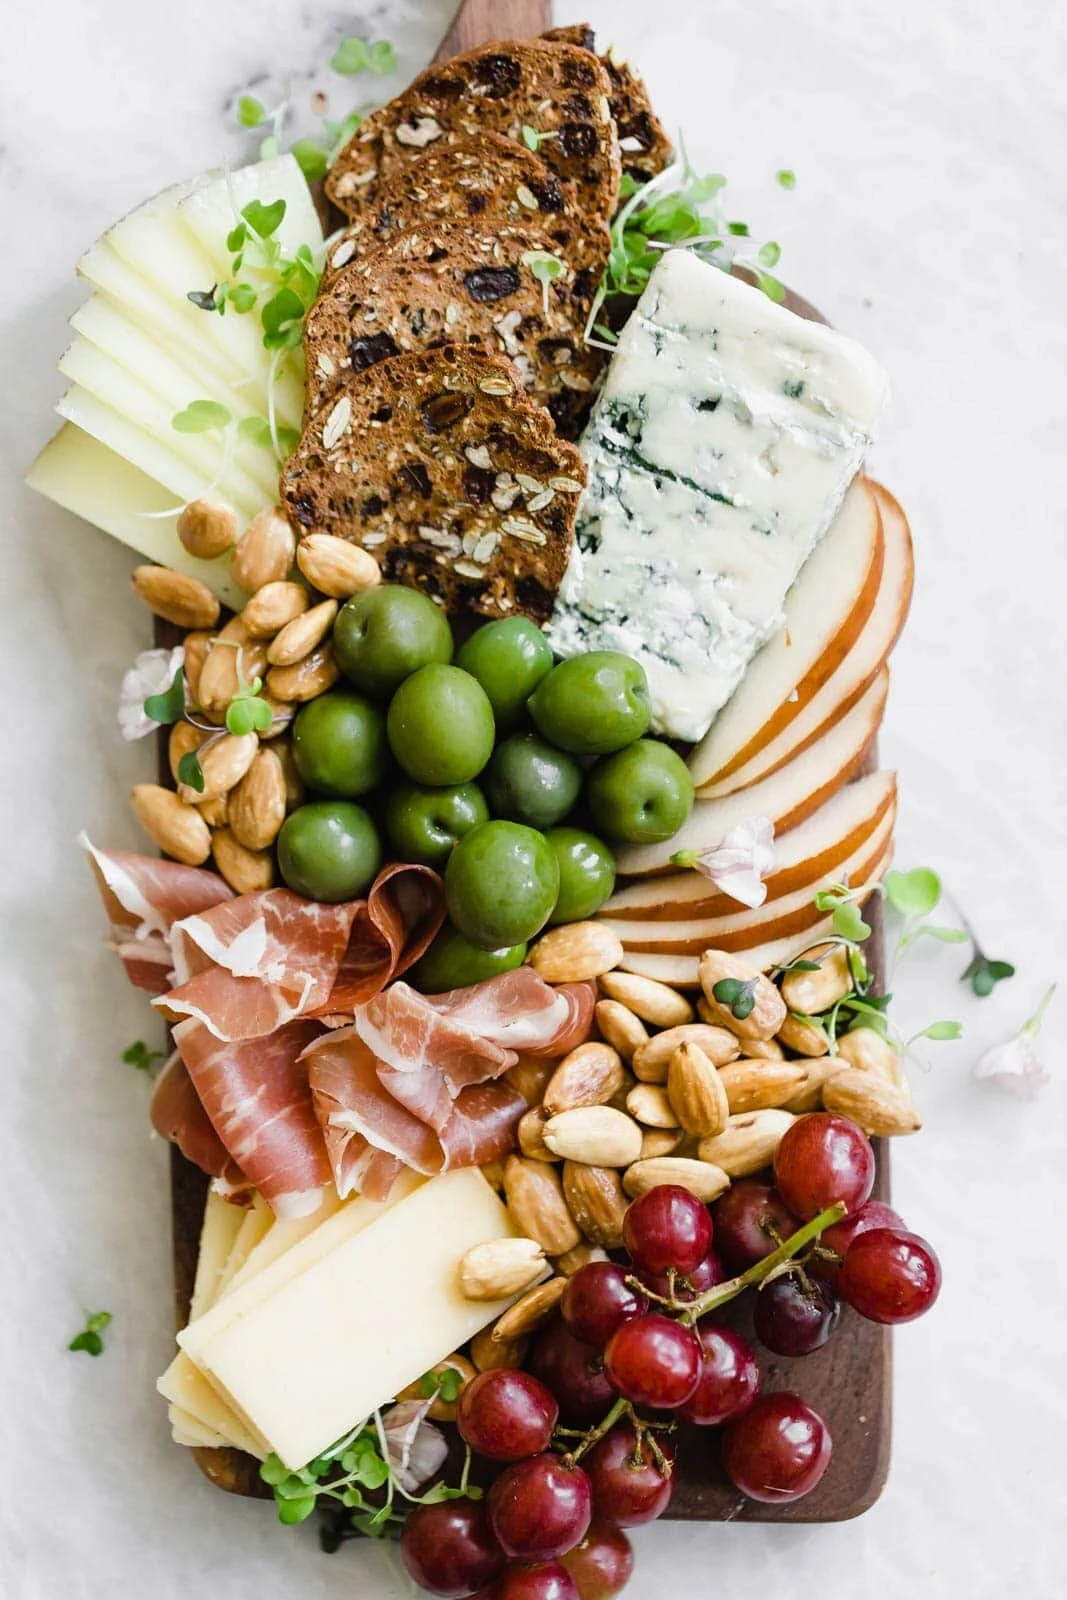 https://bromabakery.com/wp-content/uploads/2017/08/Ultimate-Easy-Cheeseboard-For-Two-4-1067x1600.webp